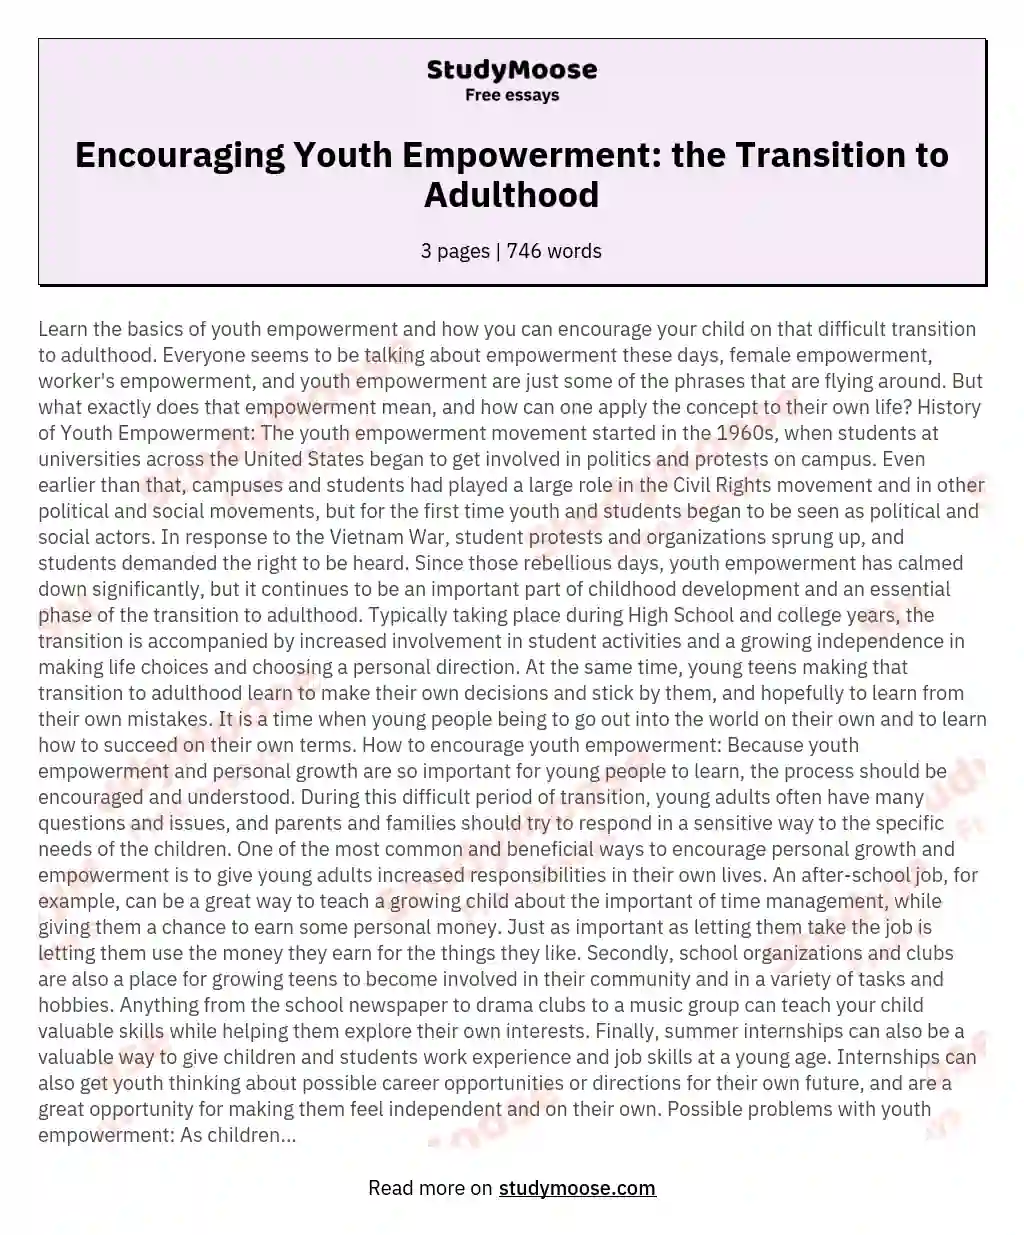 Encouraging Youth Empowerment: the Transition to Adulthood essay